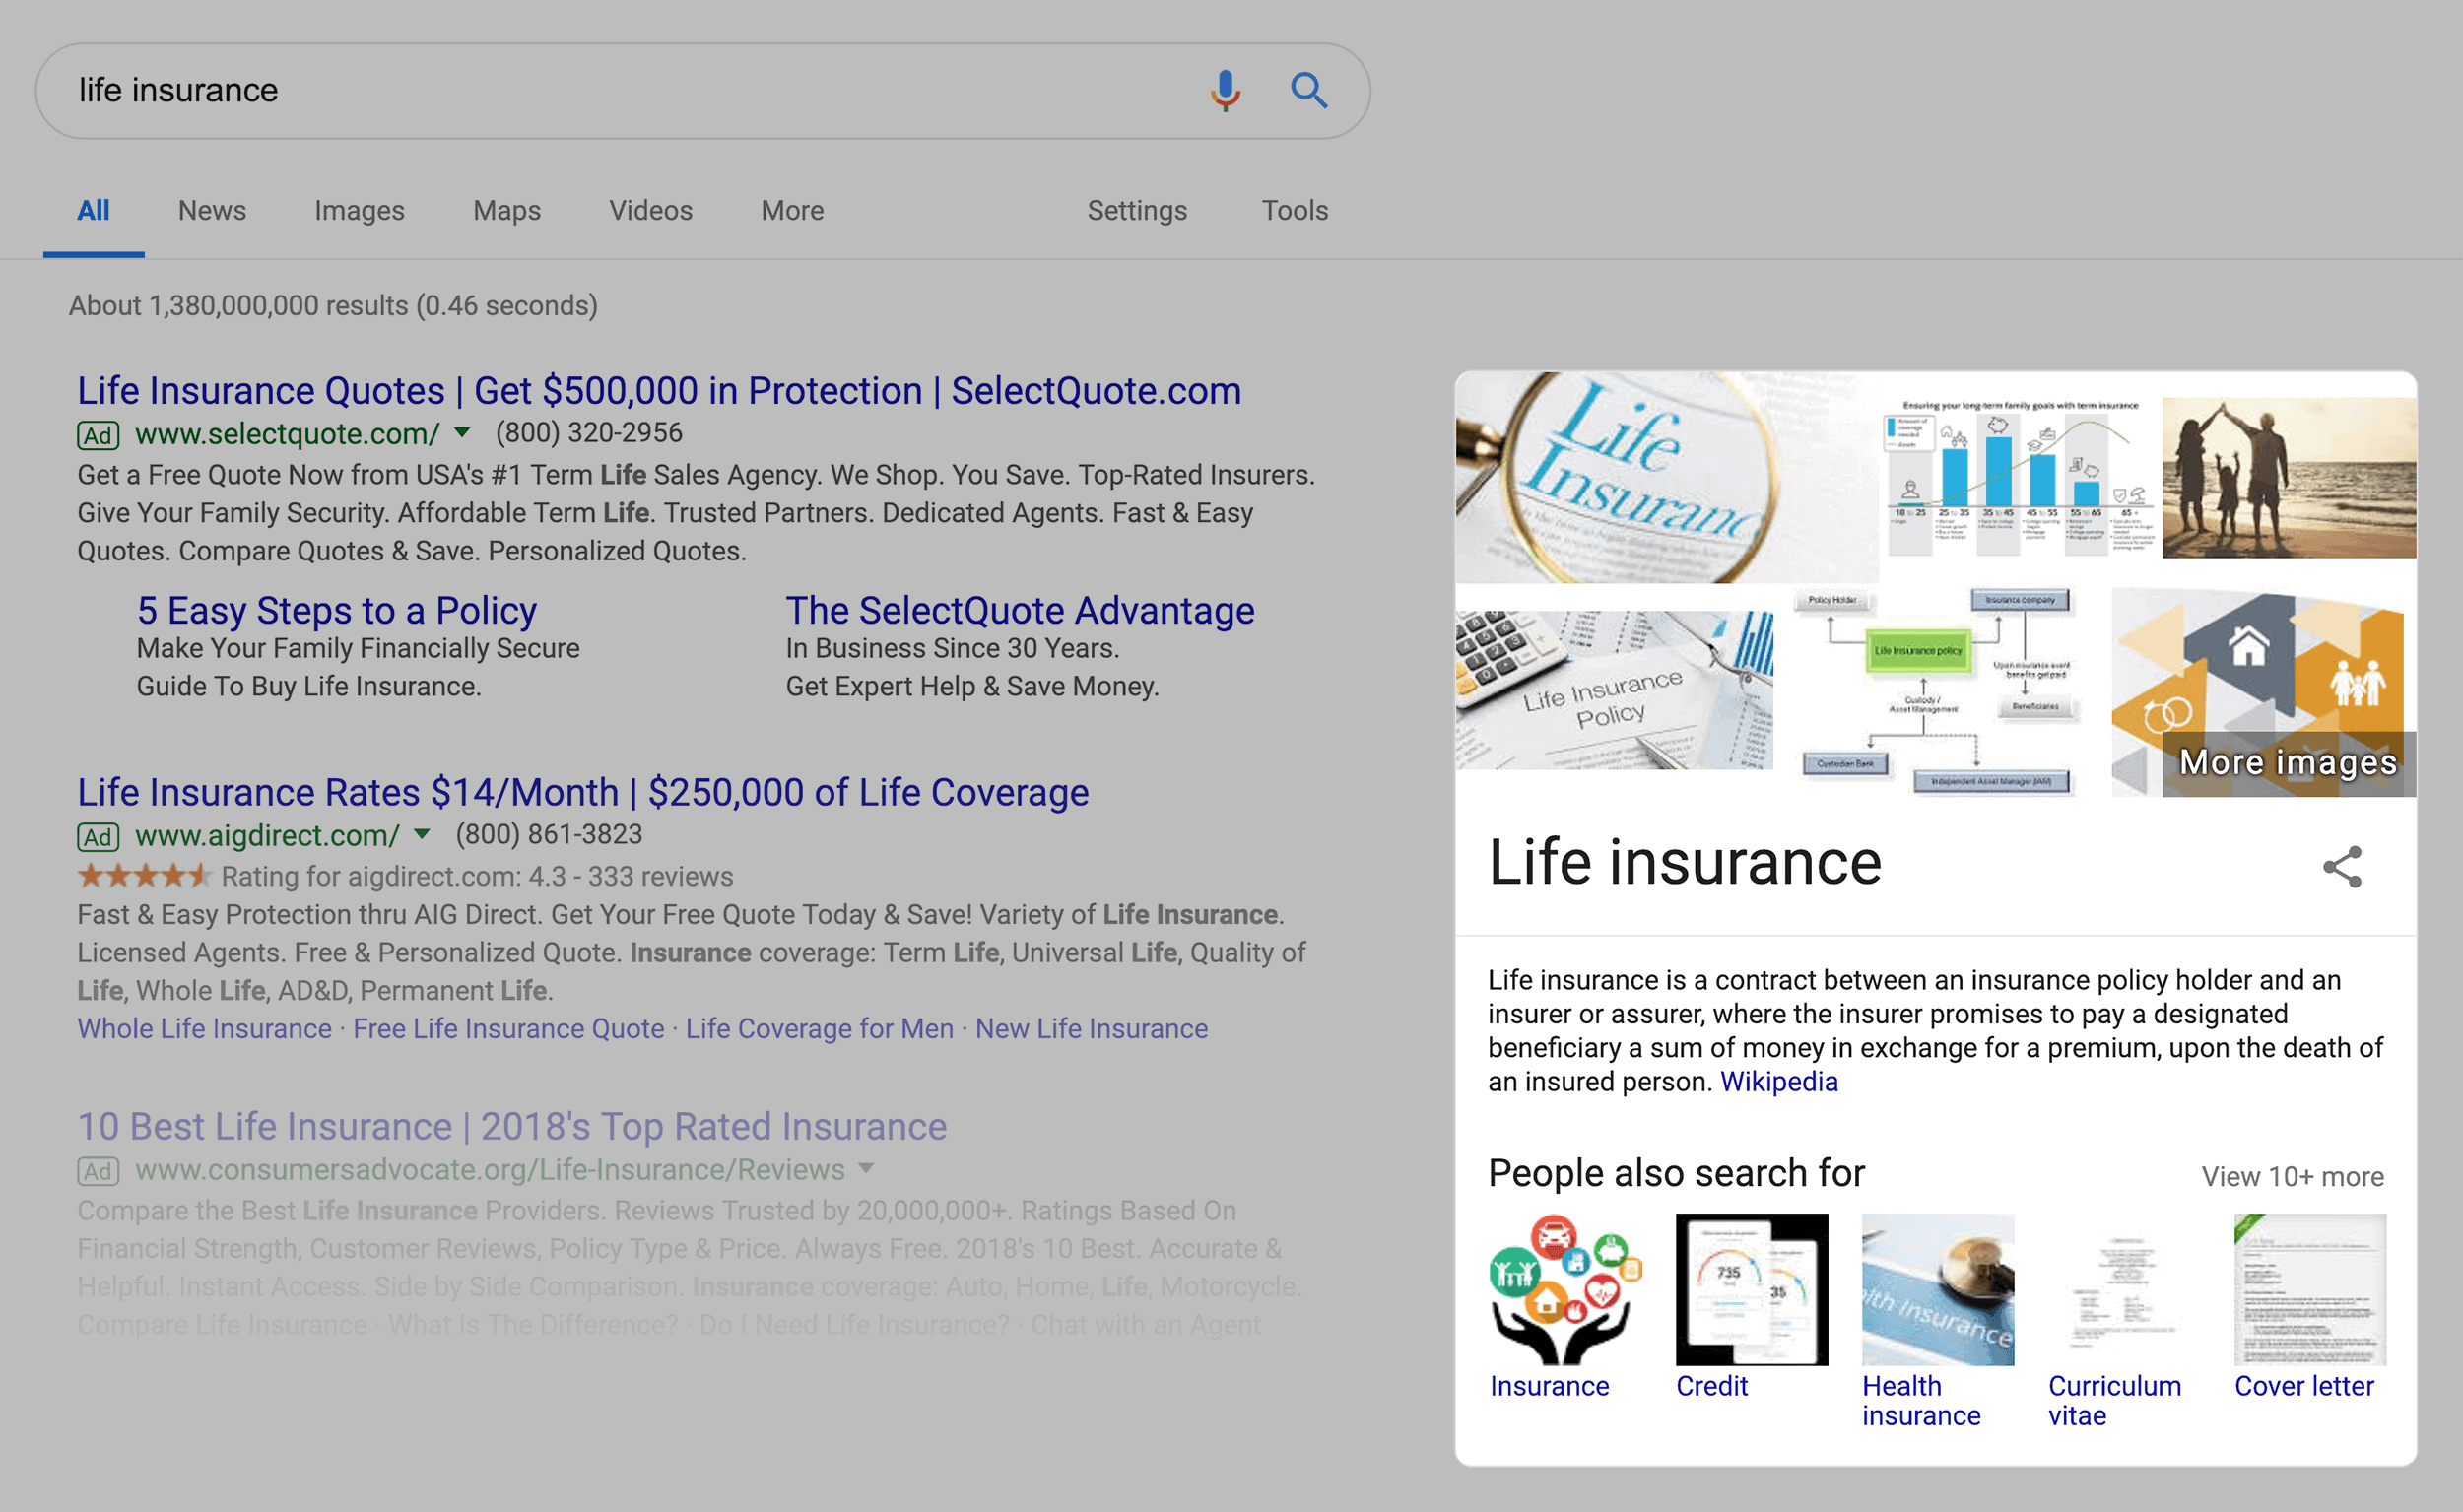 "life insurance" SERPs – Featured Snippet